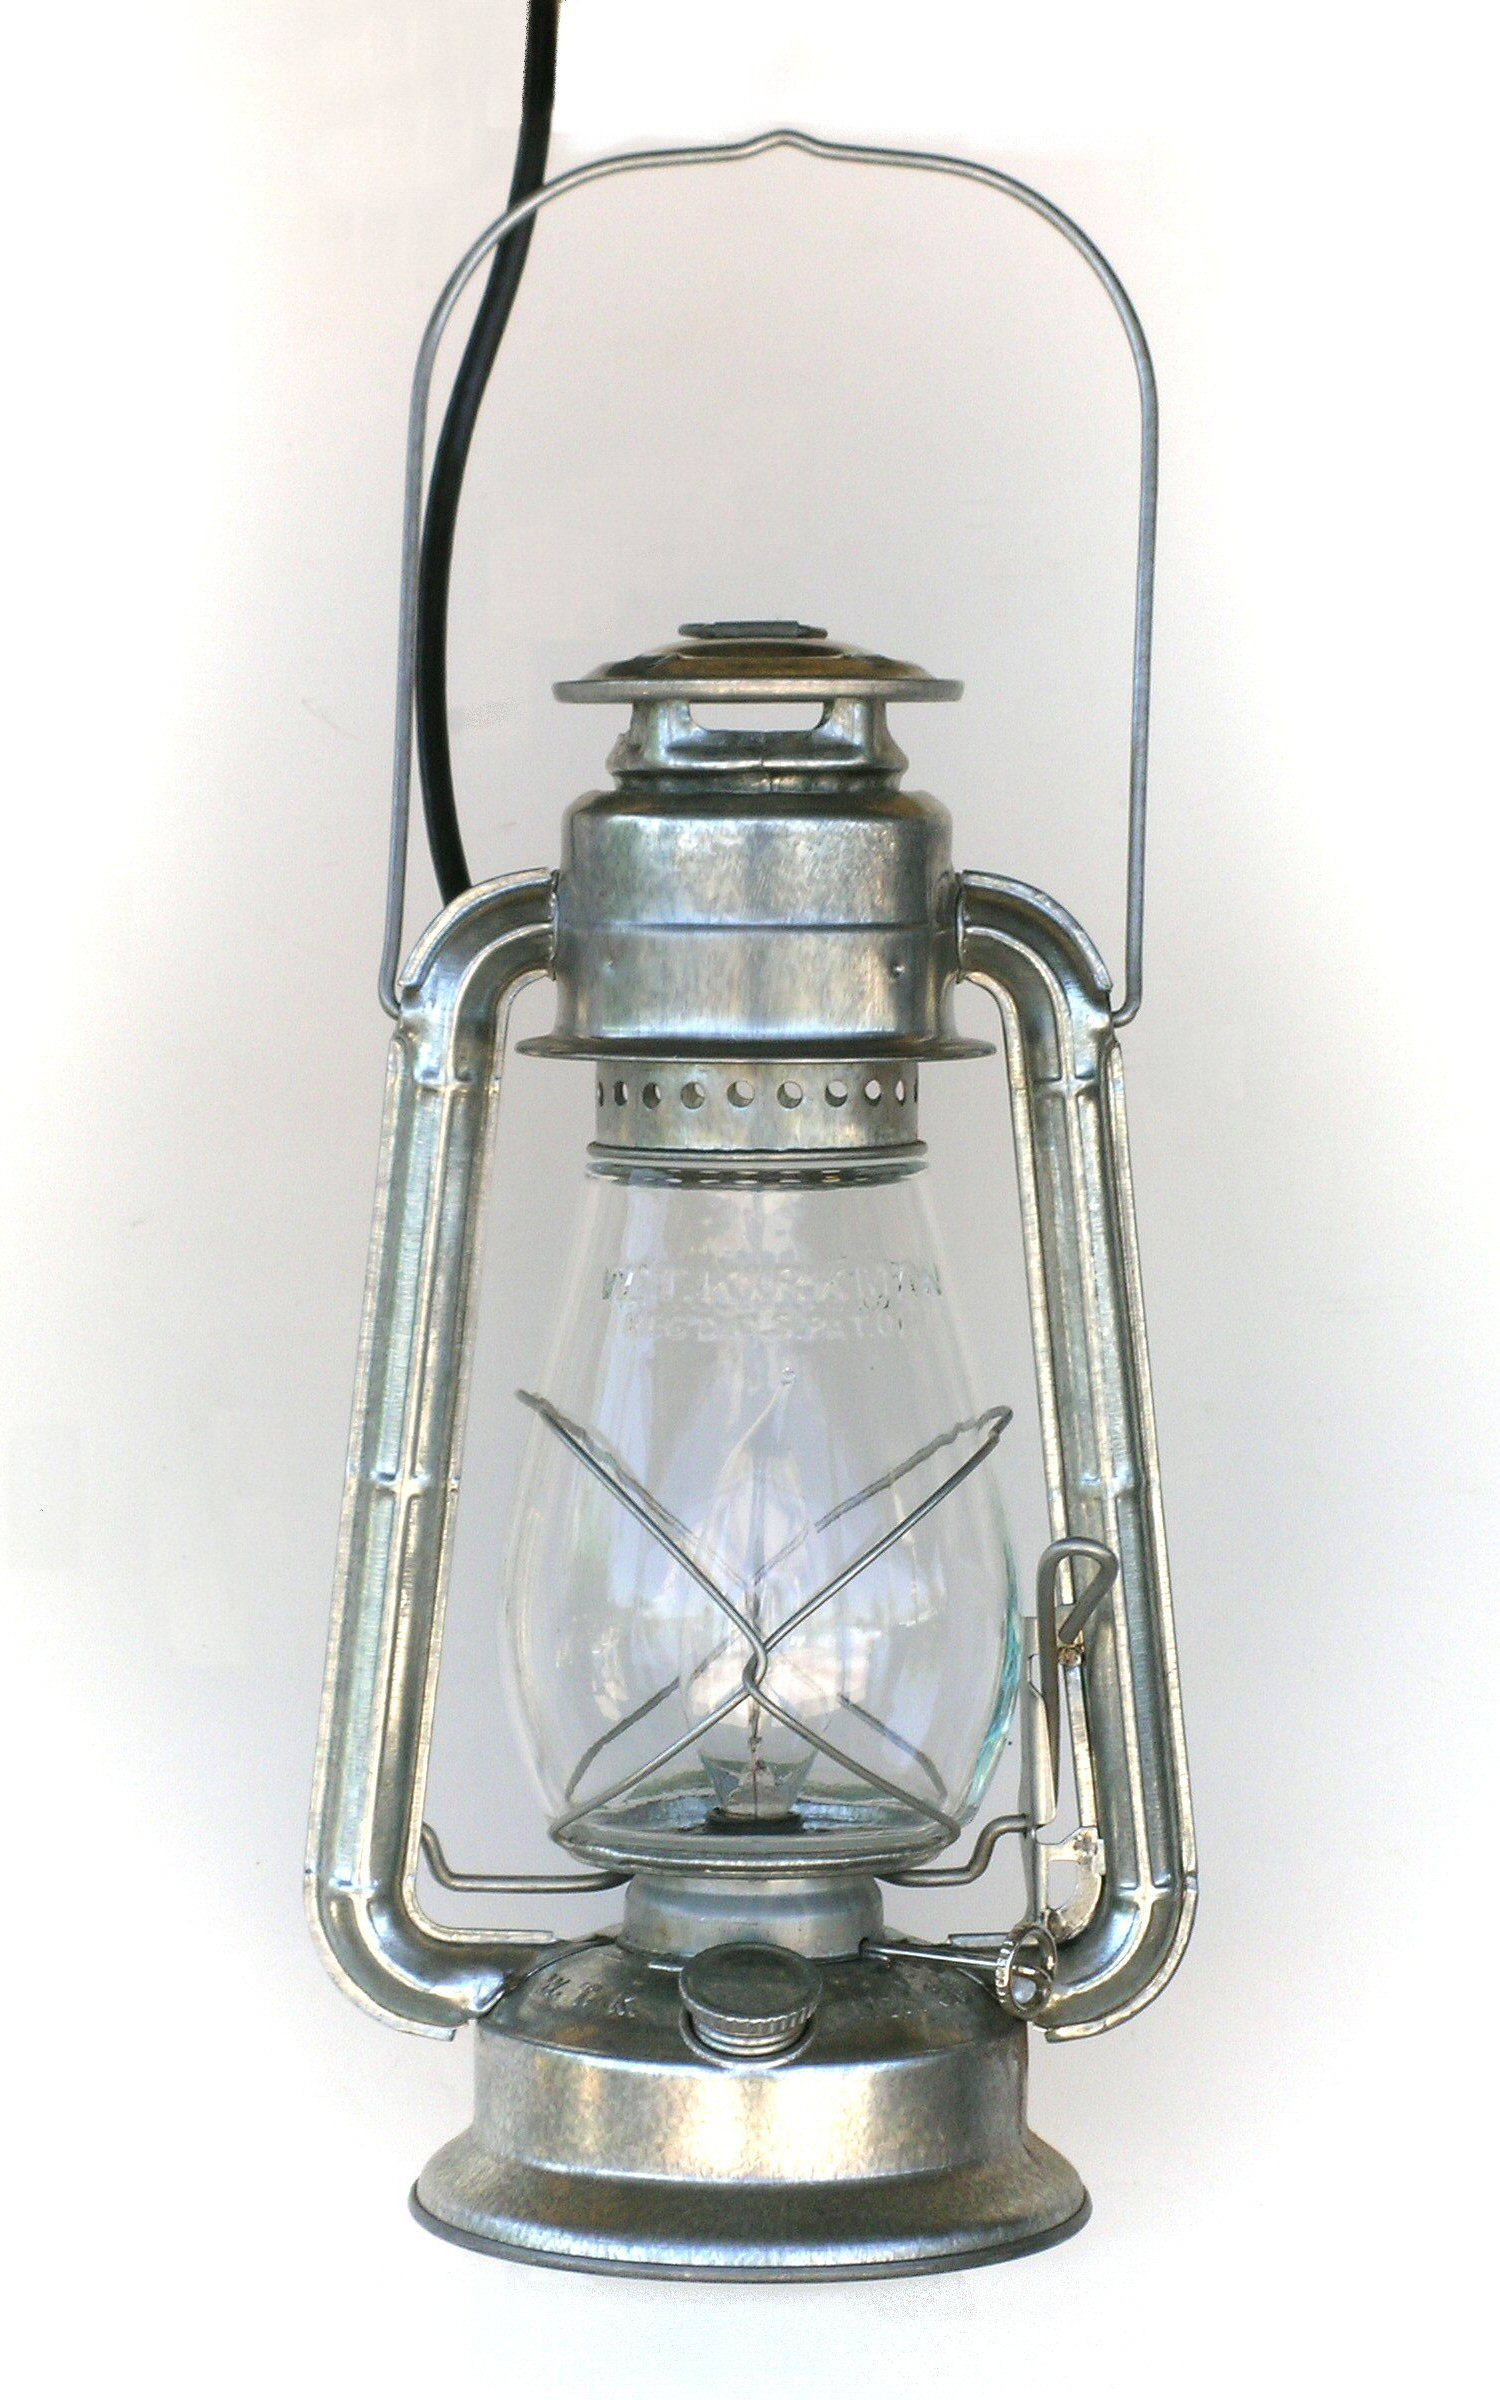 Electric Lantern Photos - The Source for Oil Lamps and Hurricane Lanterns